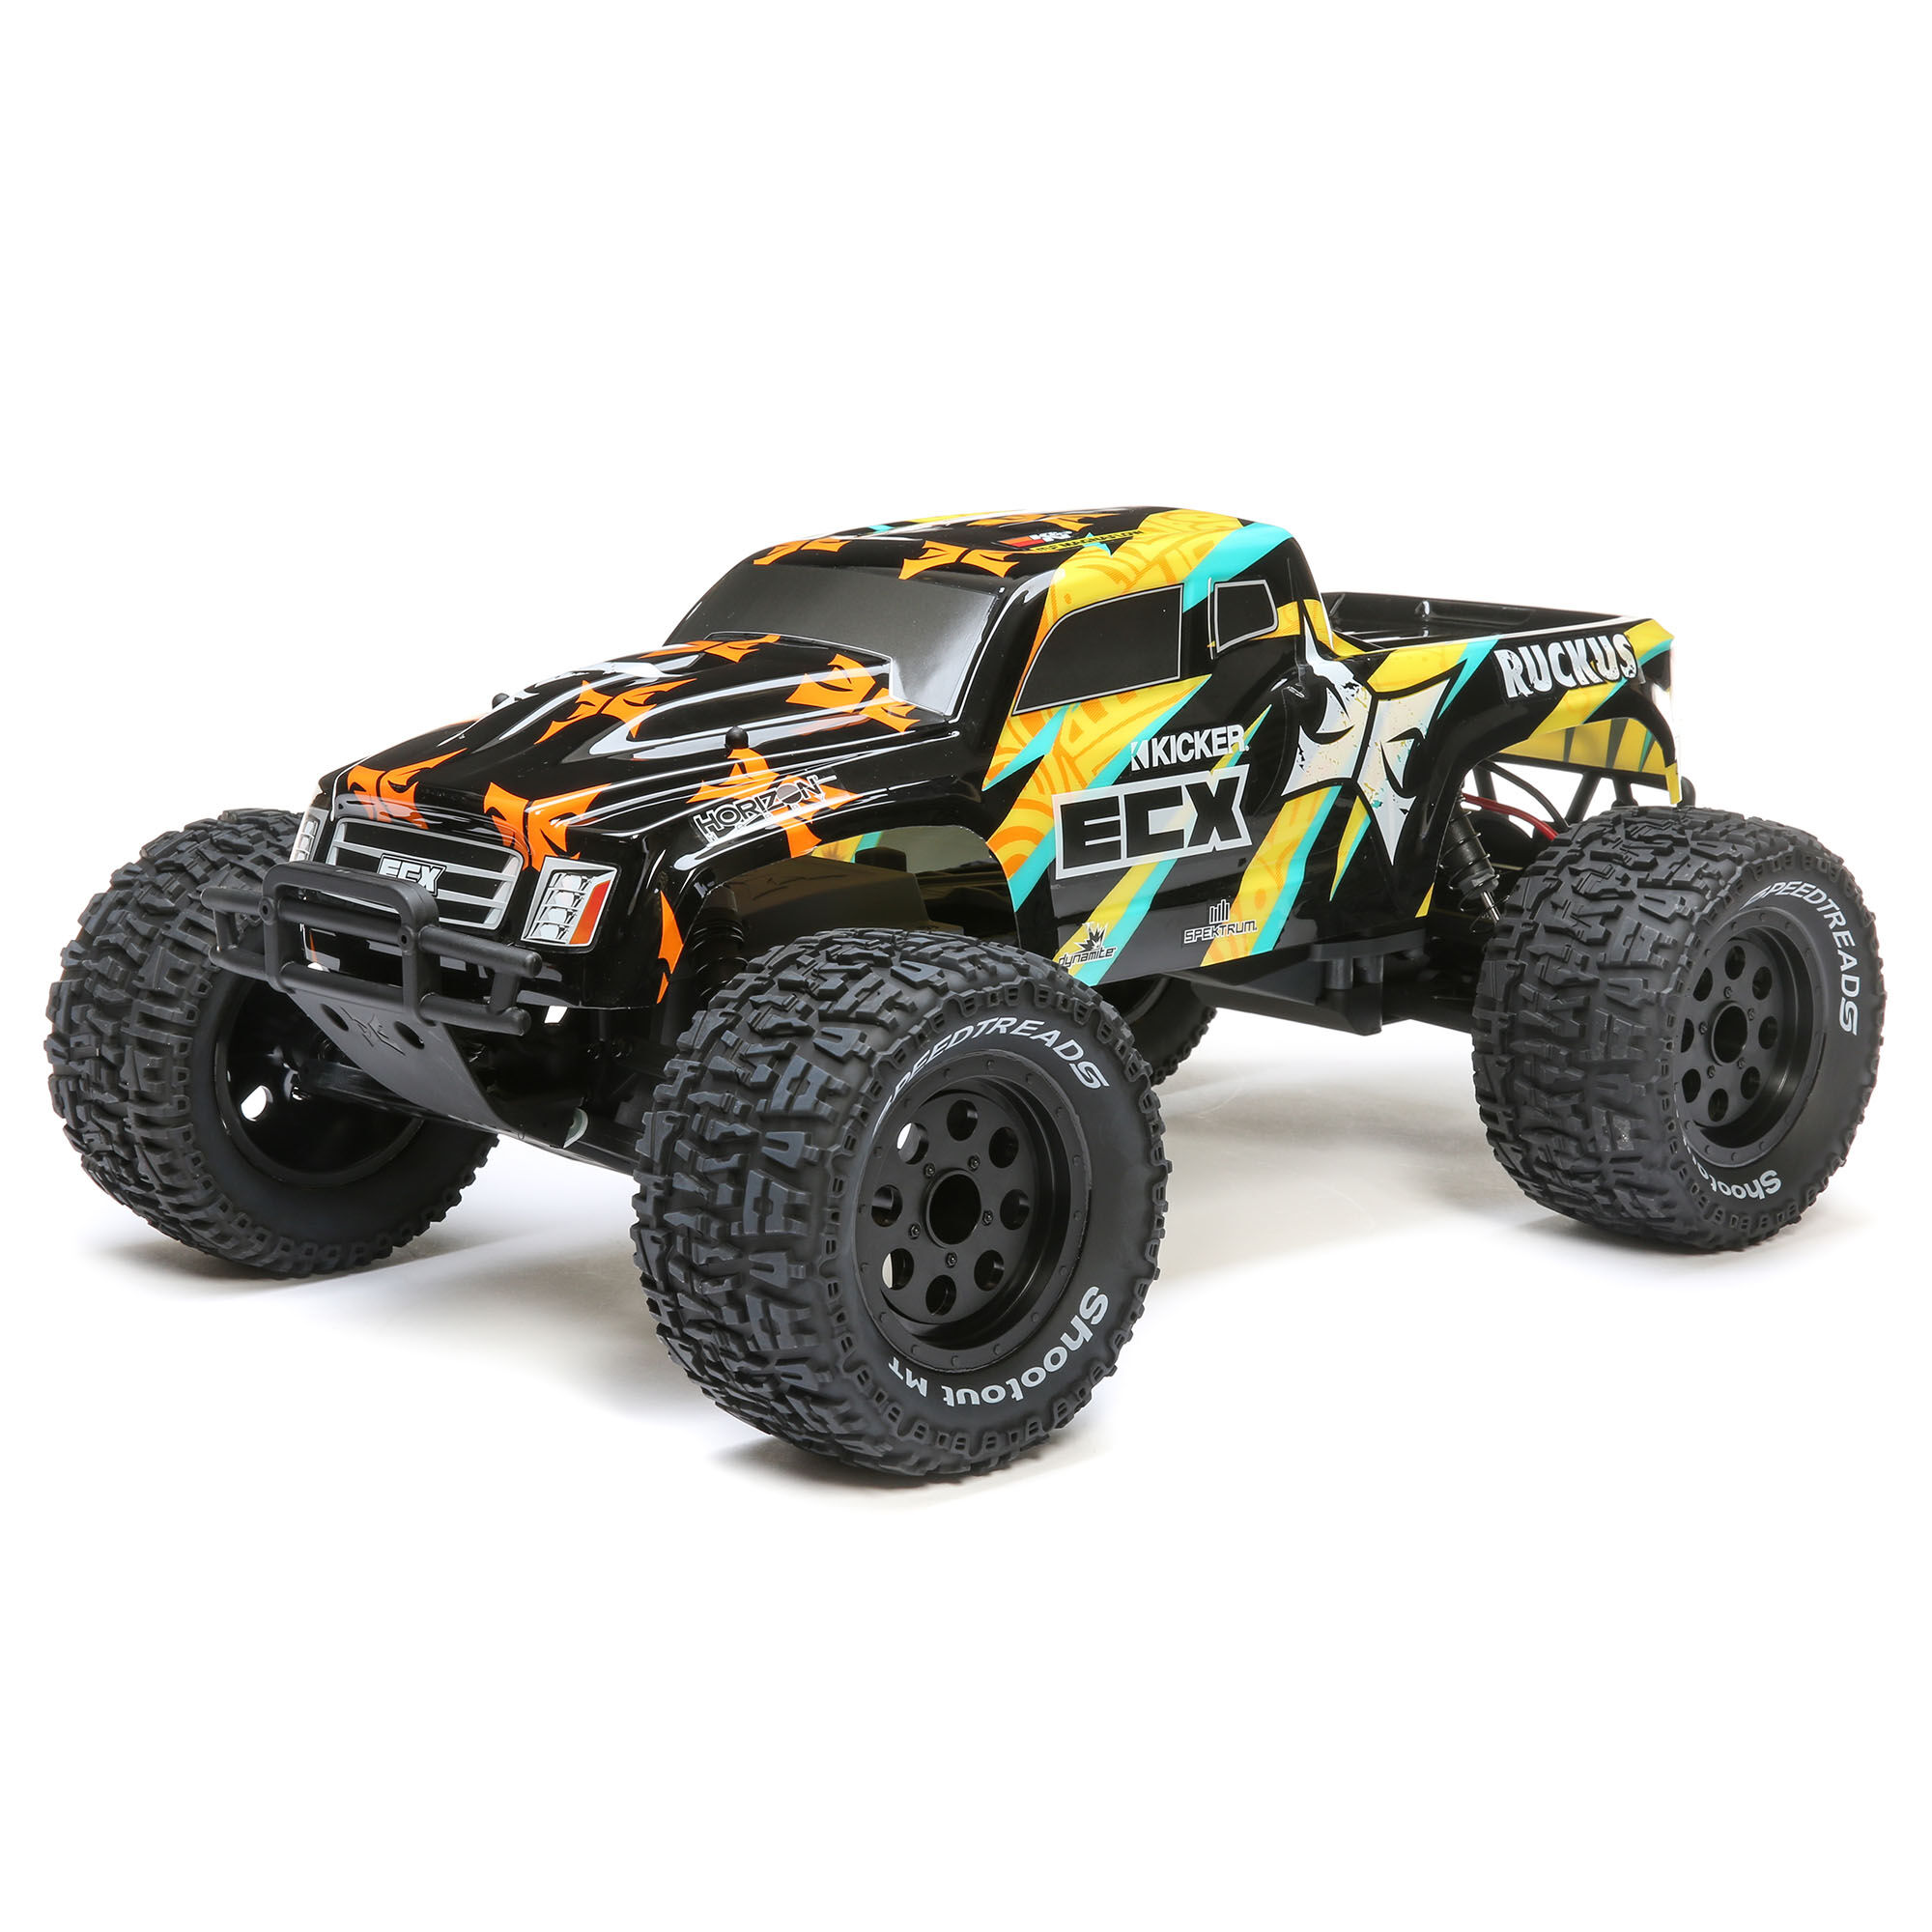 10 Ruckus 2WD Monster Truck Brushed RTR 